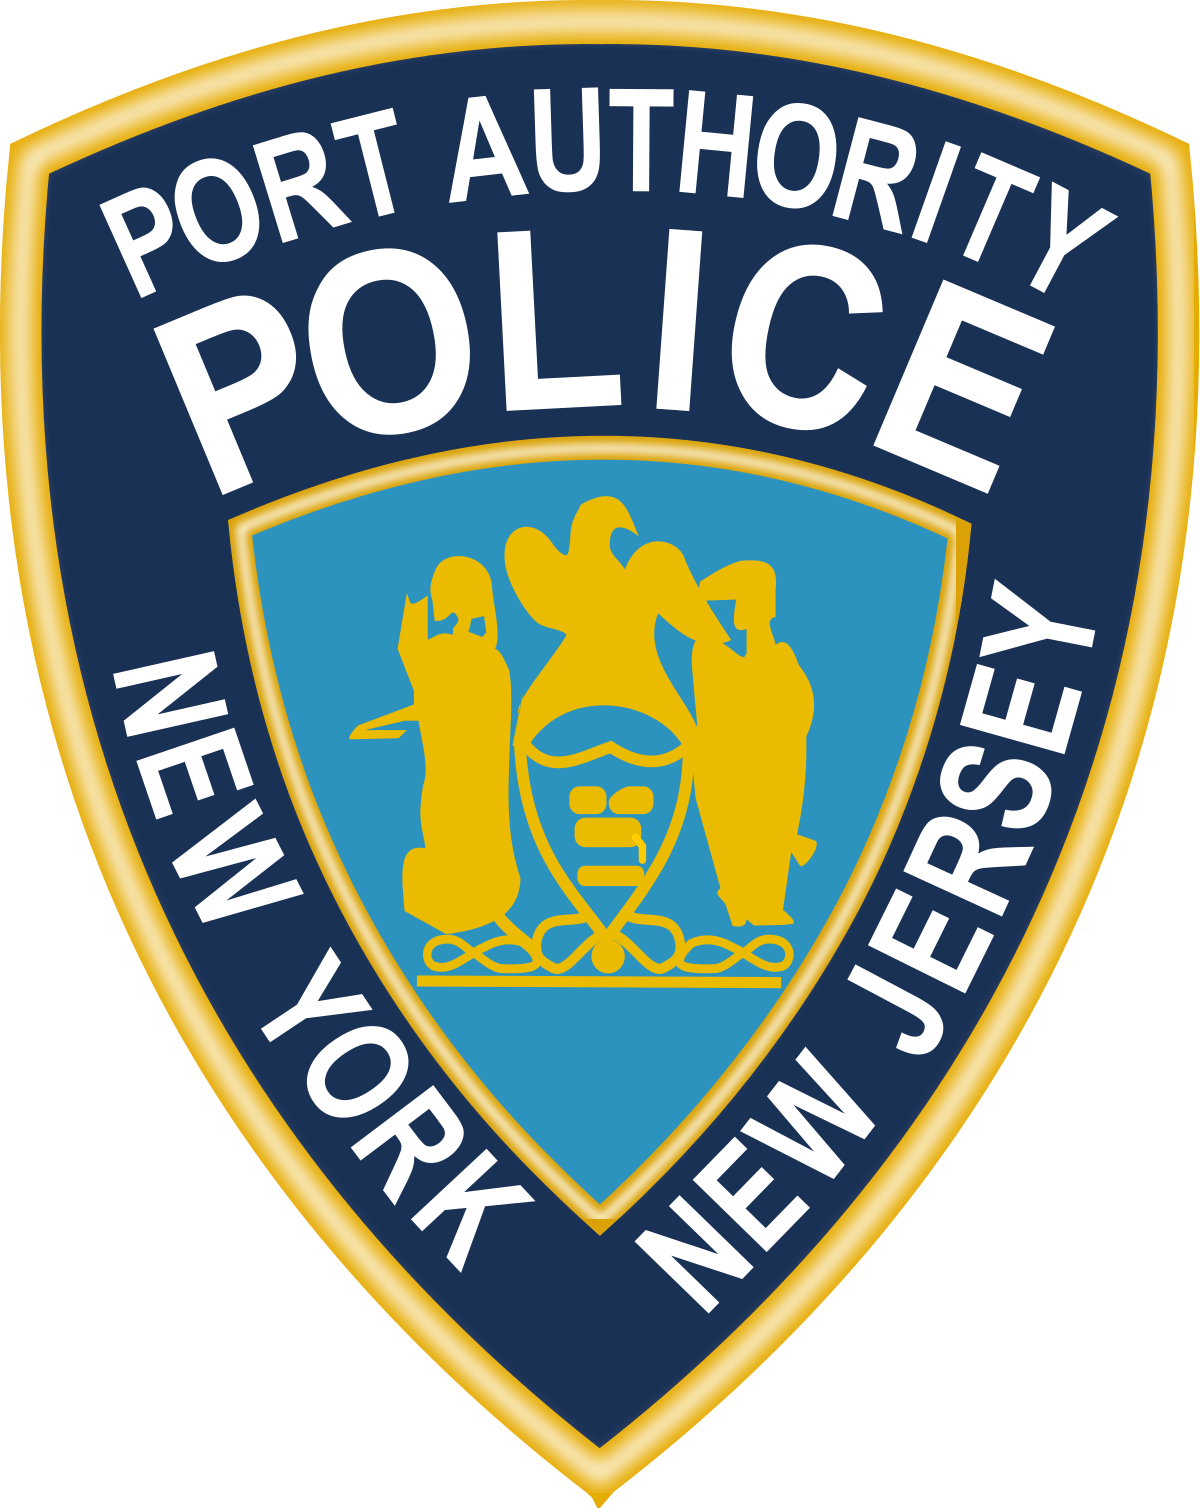 Police Shield Logo - Port Authority of New York and New Jersey Police Department